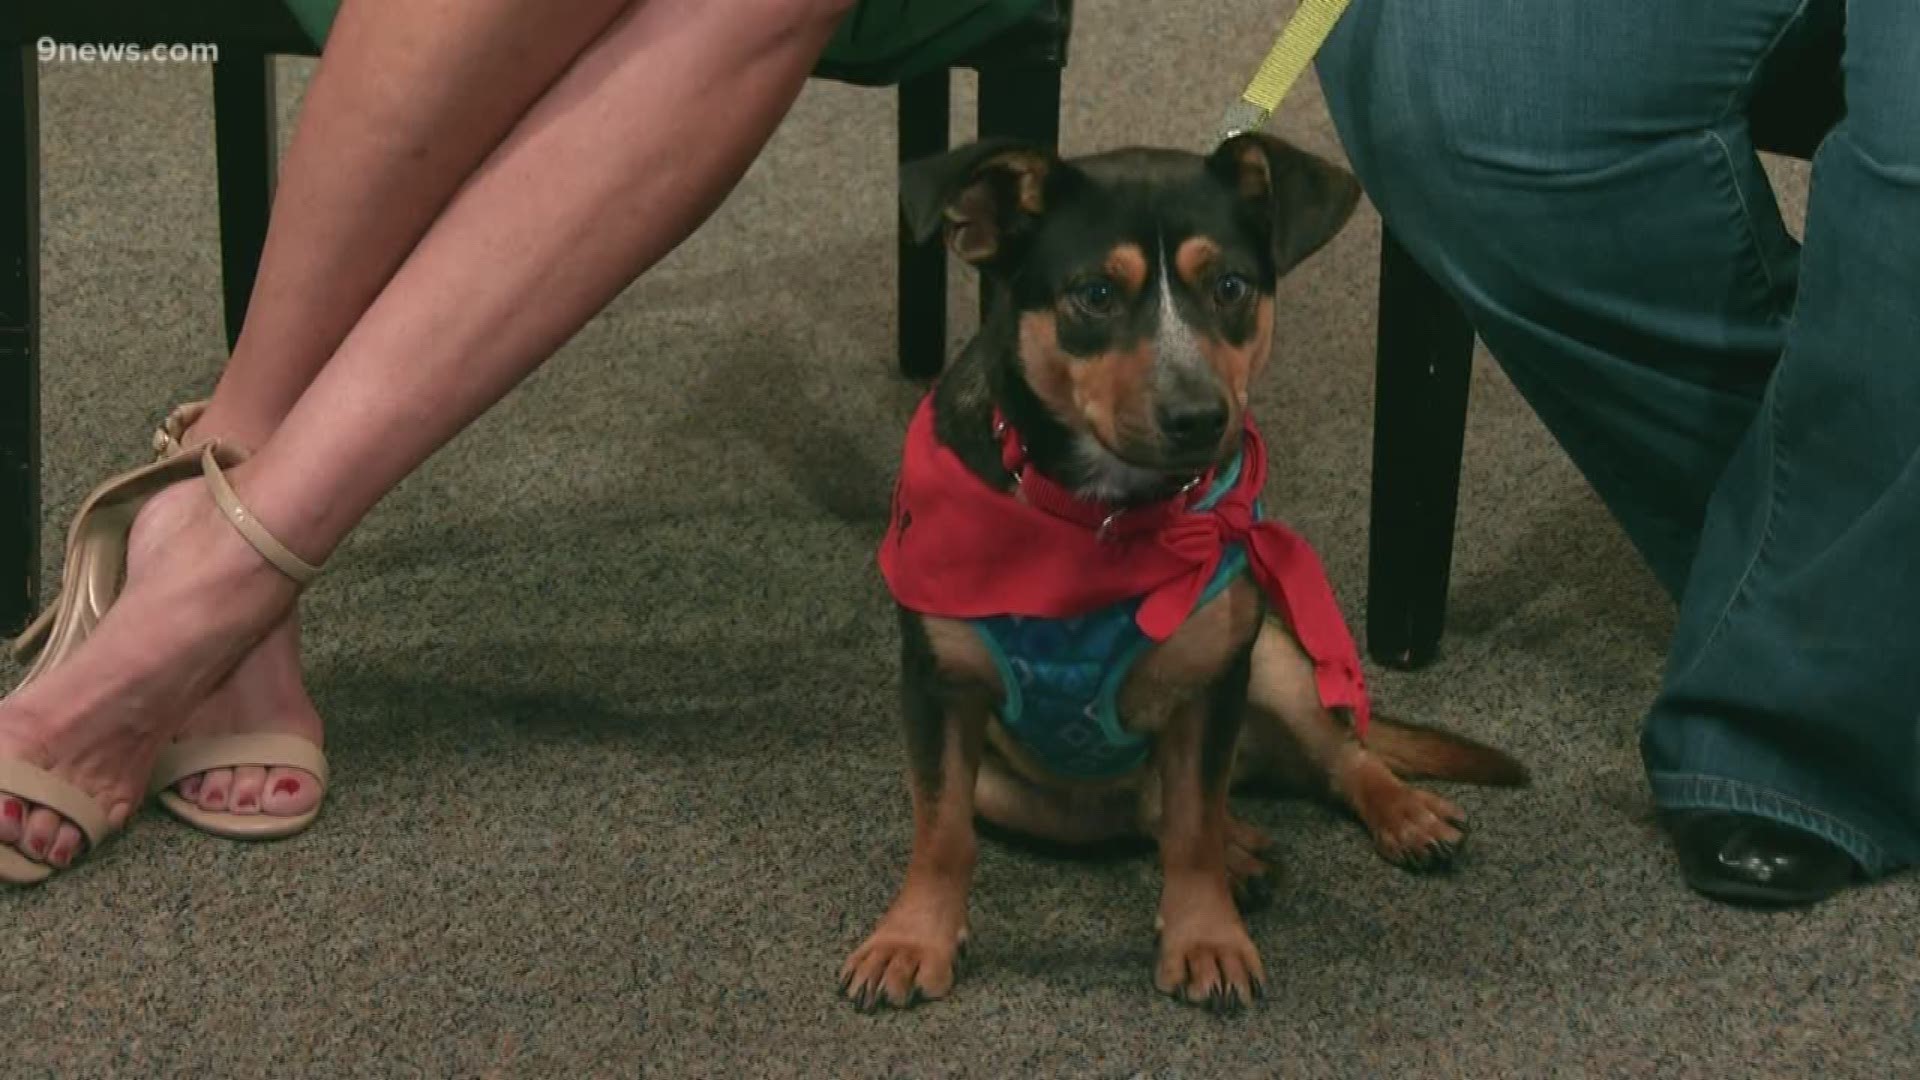 Morris, a sweet Shepherd/Dachshund mix with a big personality, is in need of a loving home.